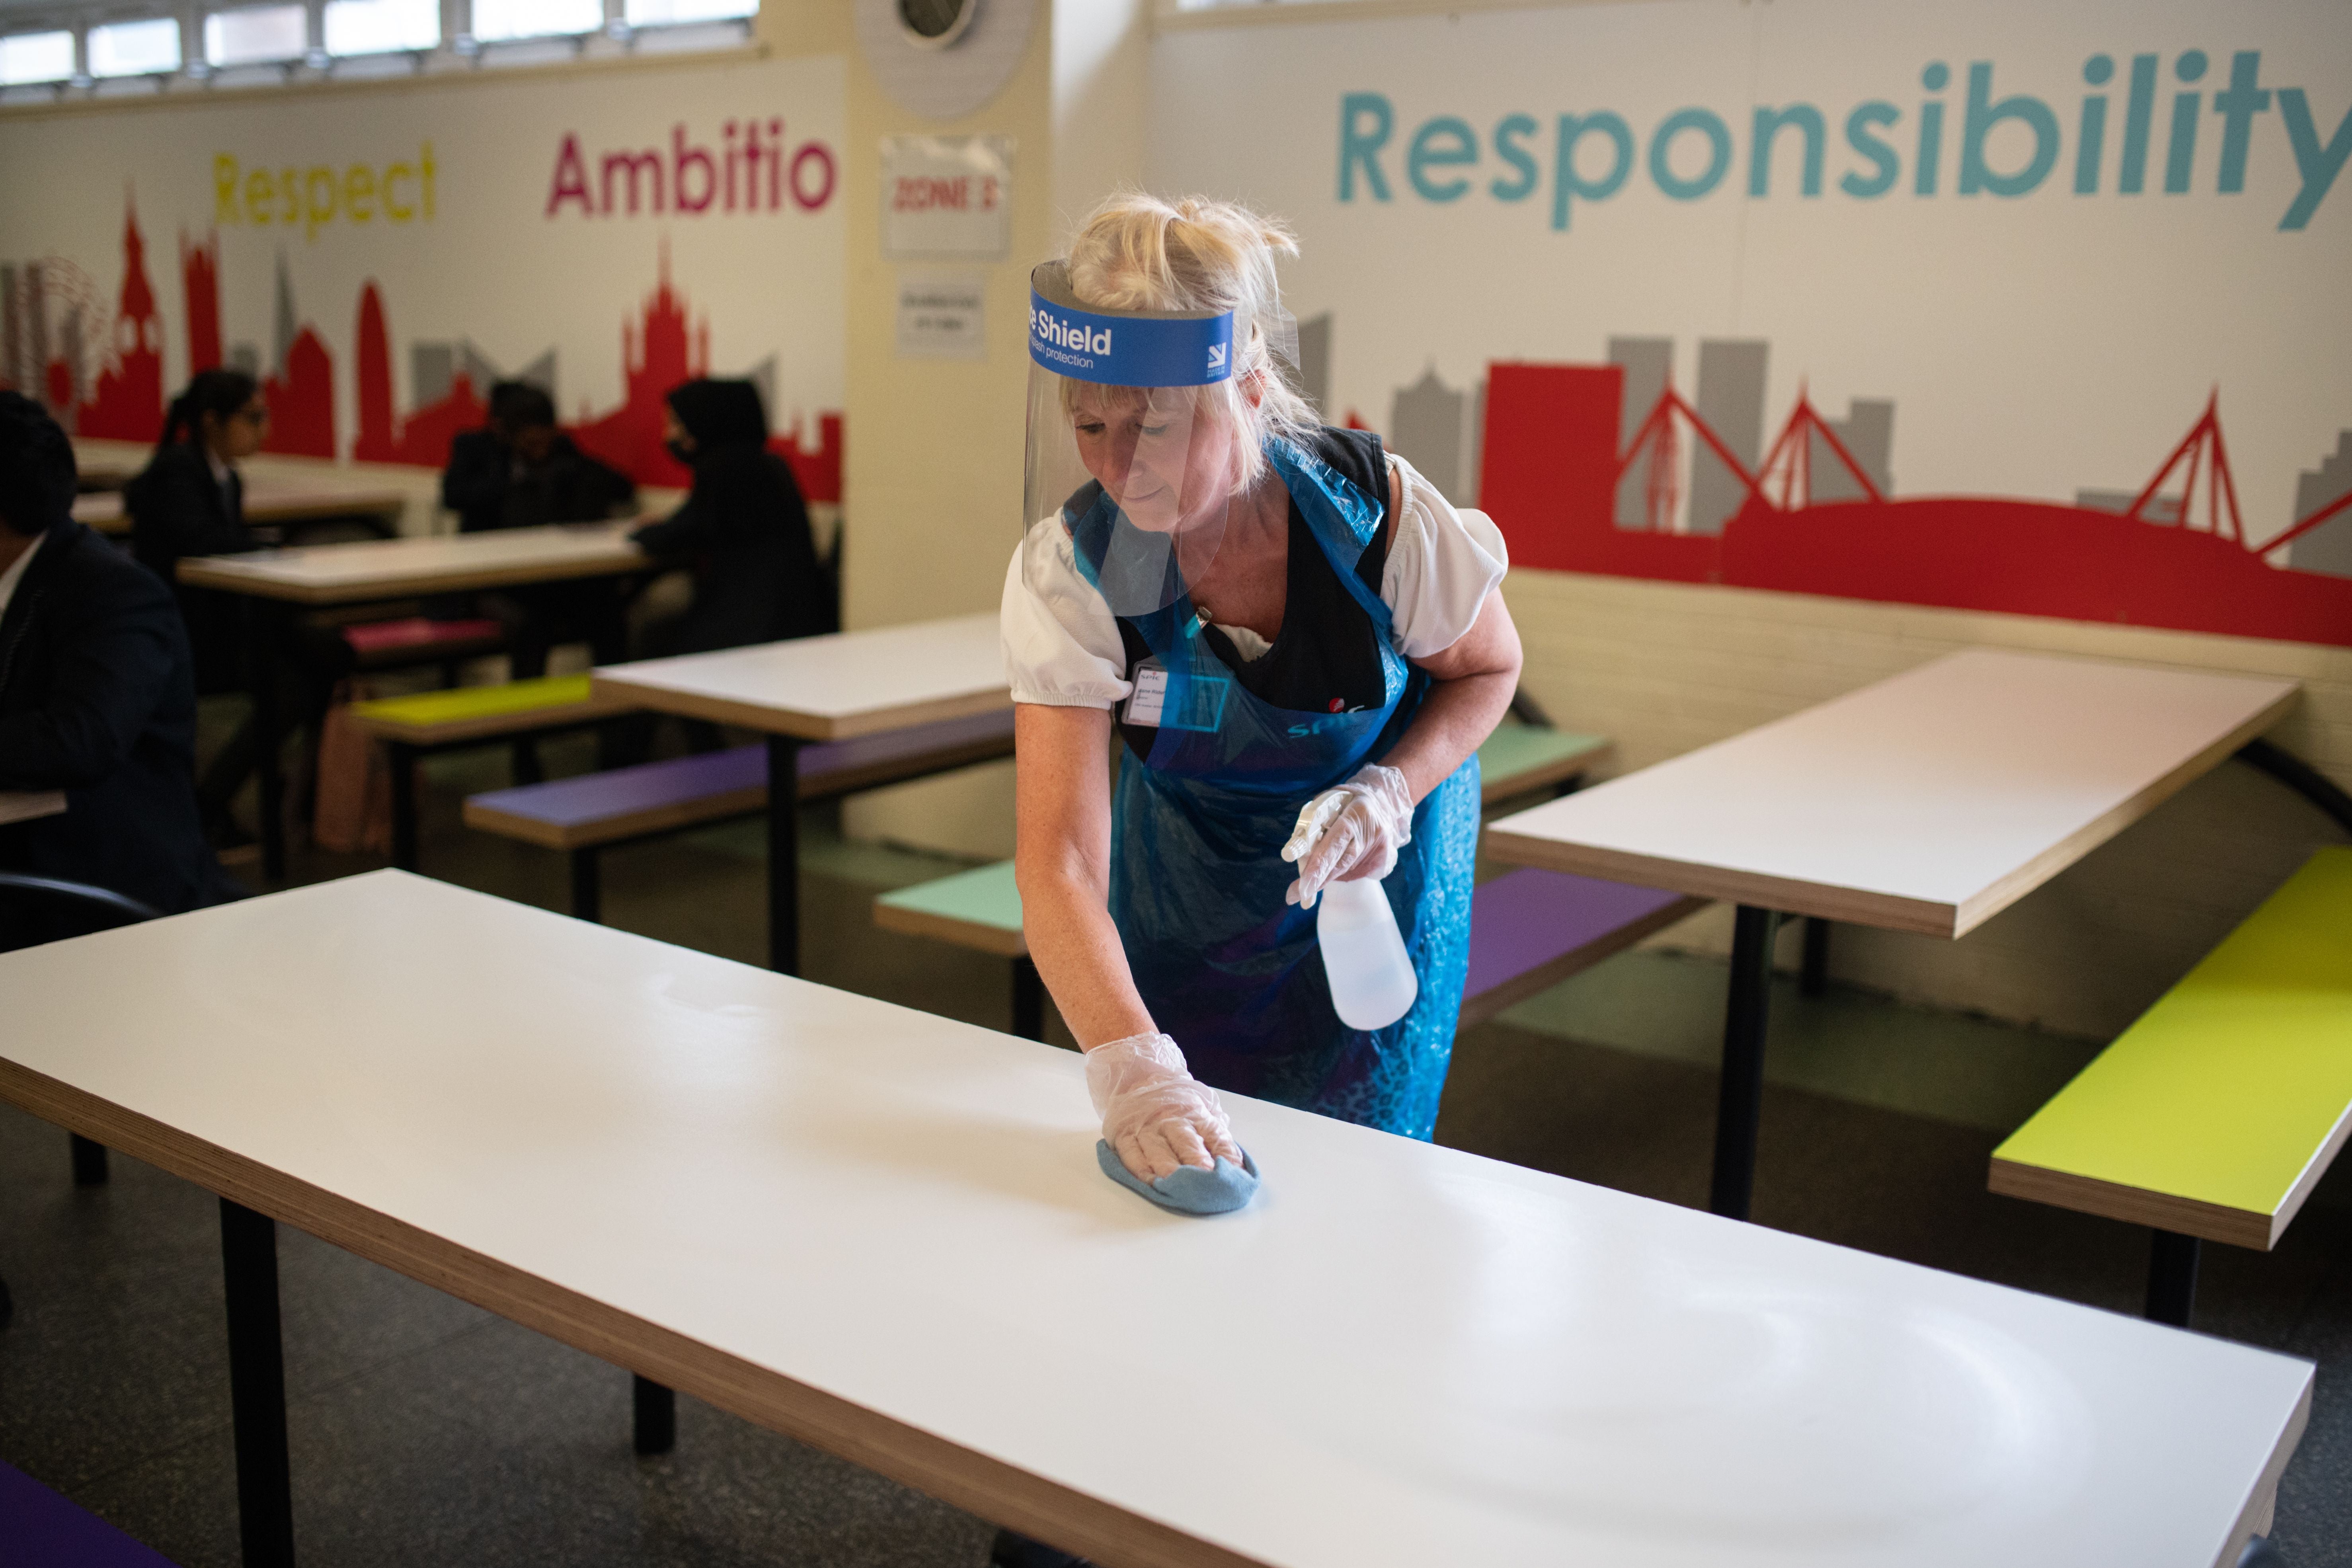 Woman cleaning school classroom table